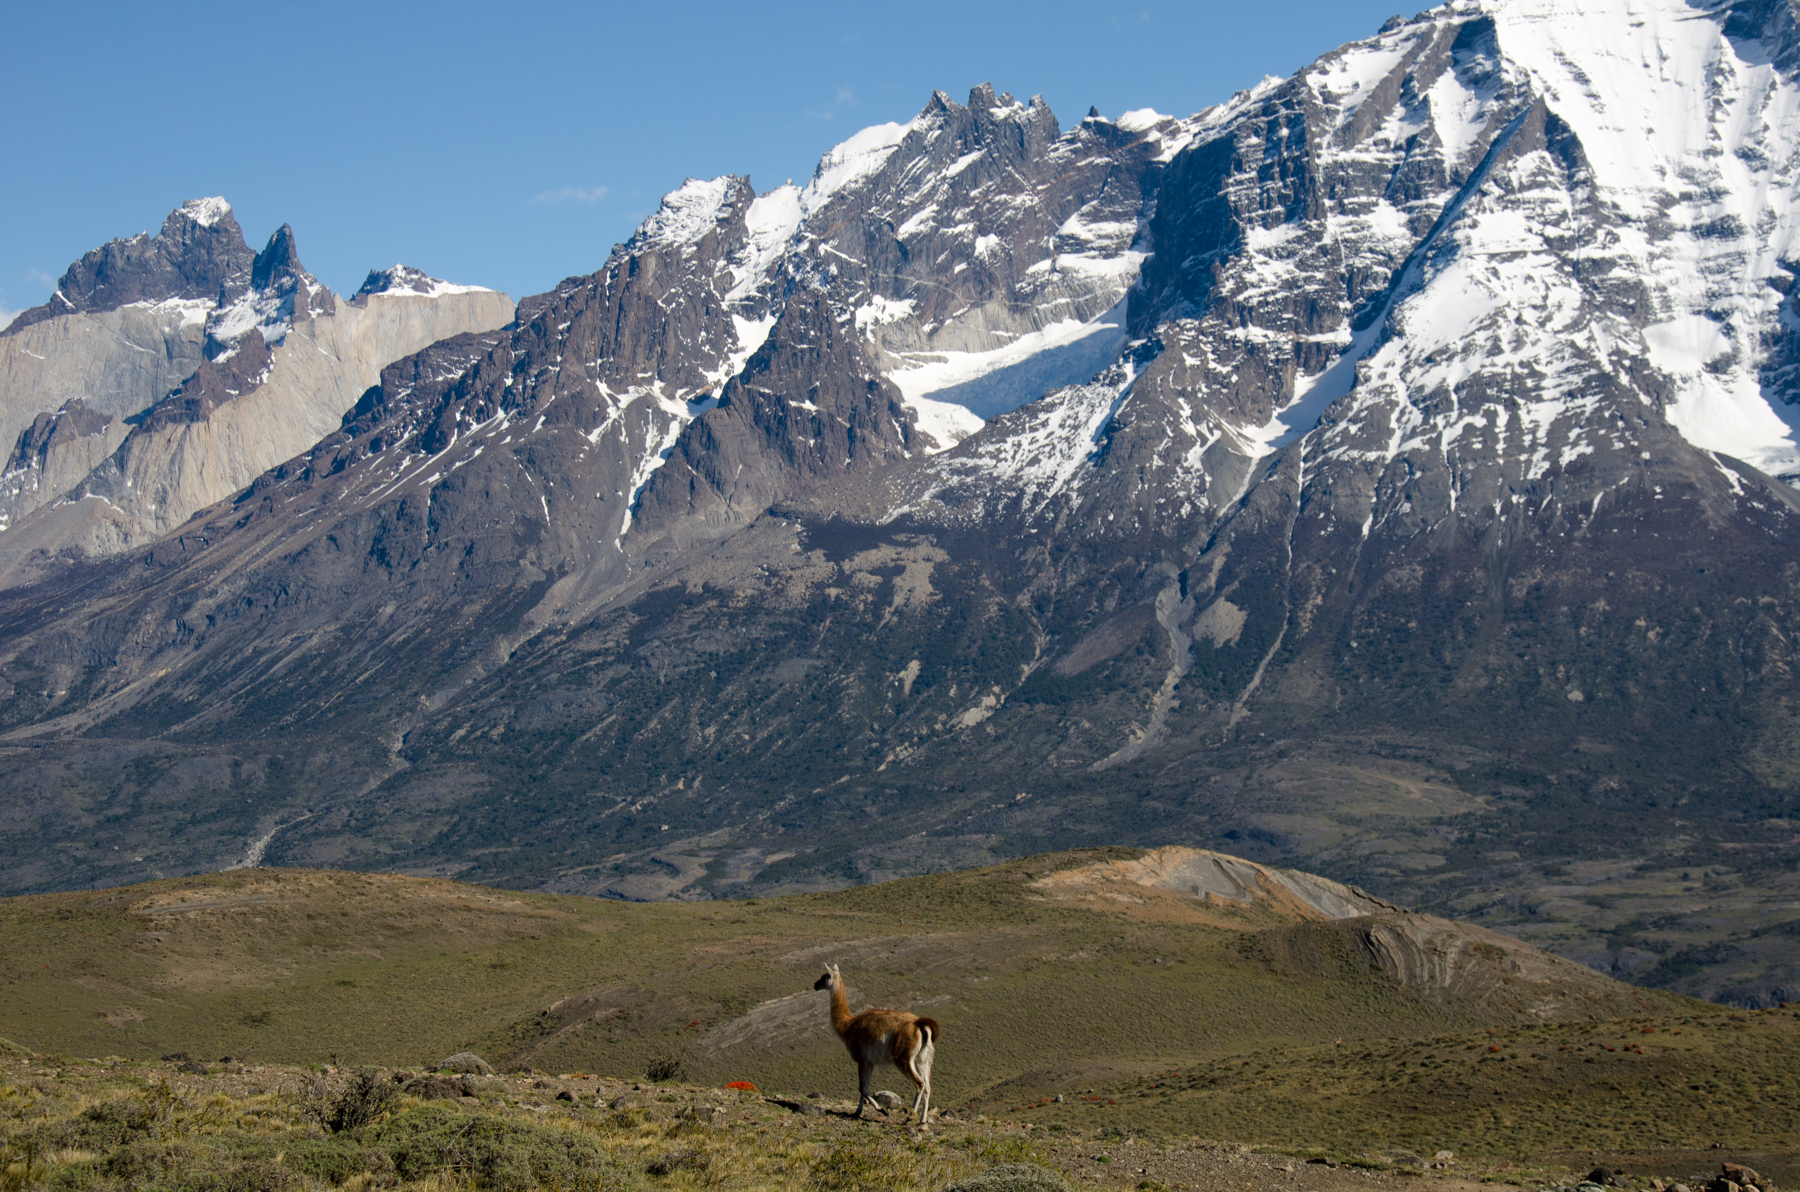 Guanaco spotting in the Torres del Paine National Park